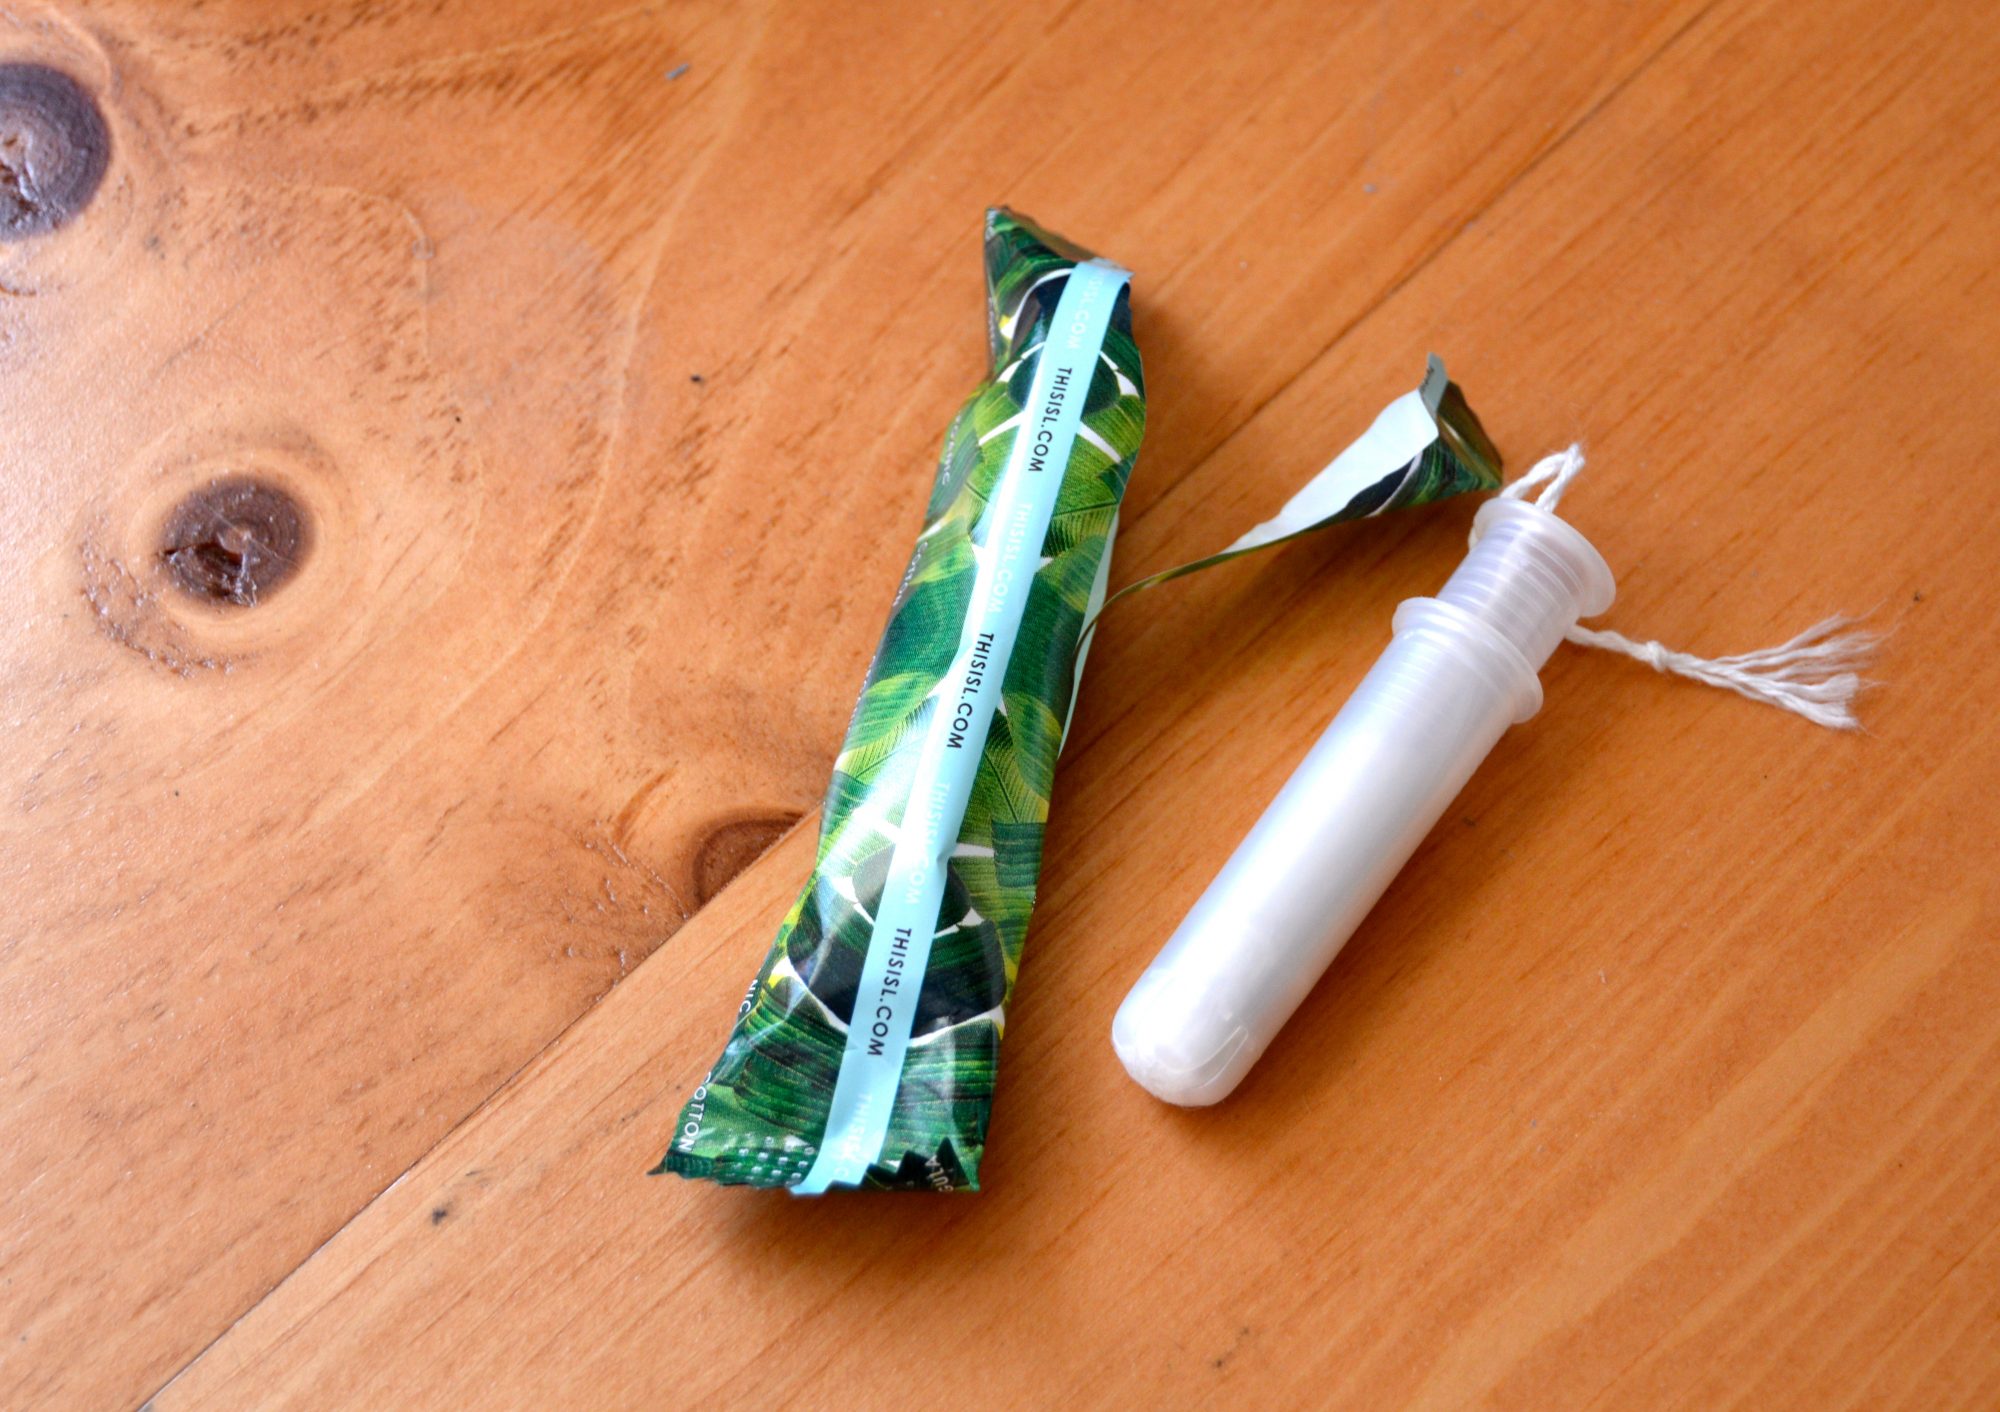 switched to organic tampons 3 months, and here's why I'll go back - HelloGigglesHelloGiggles